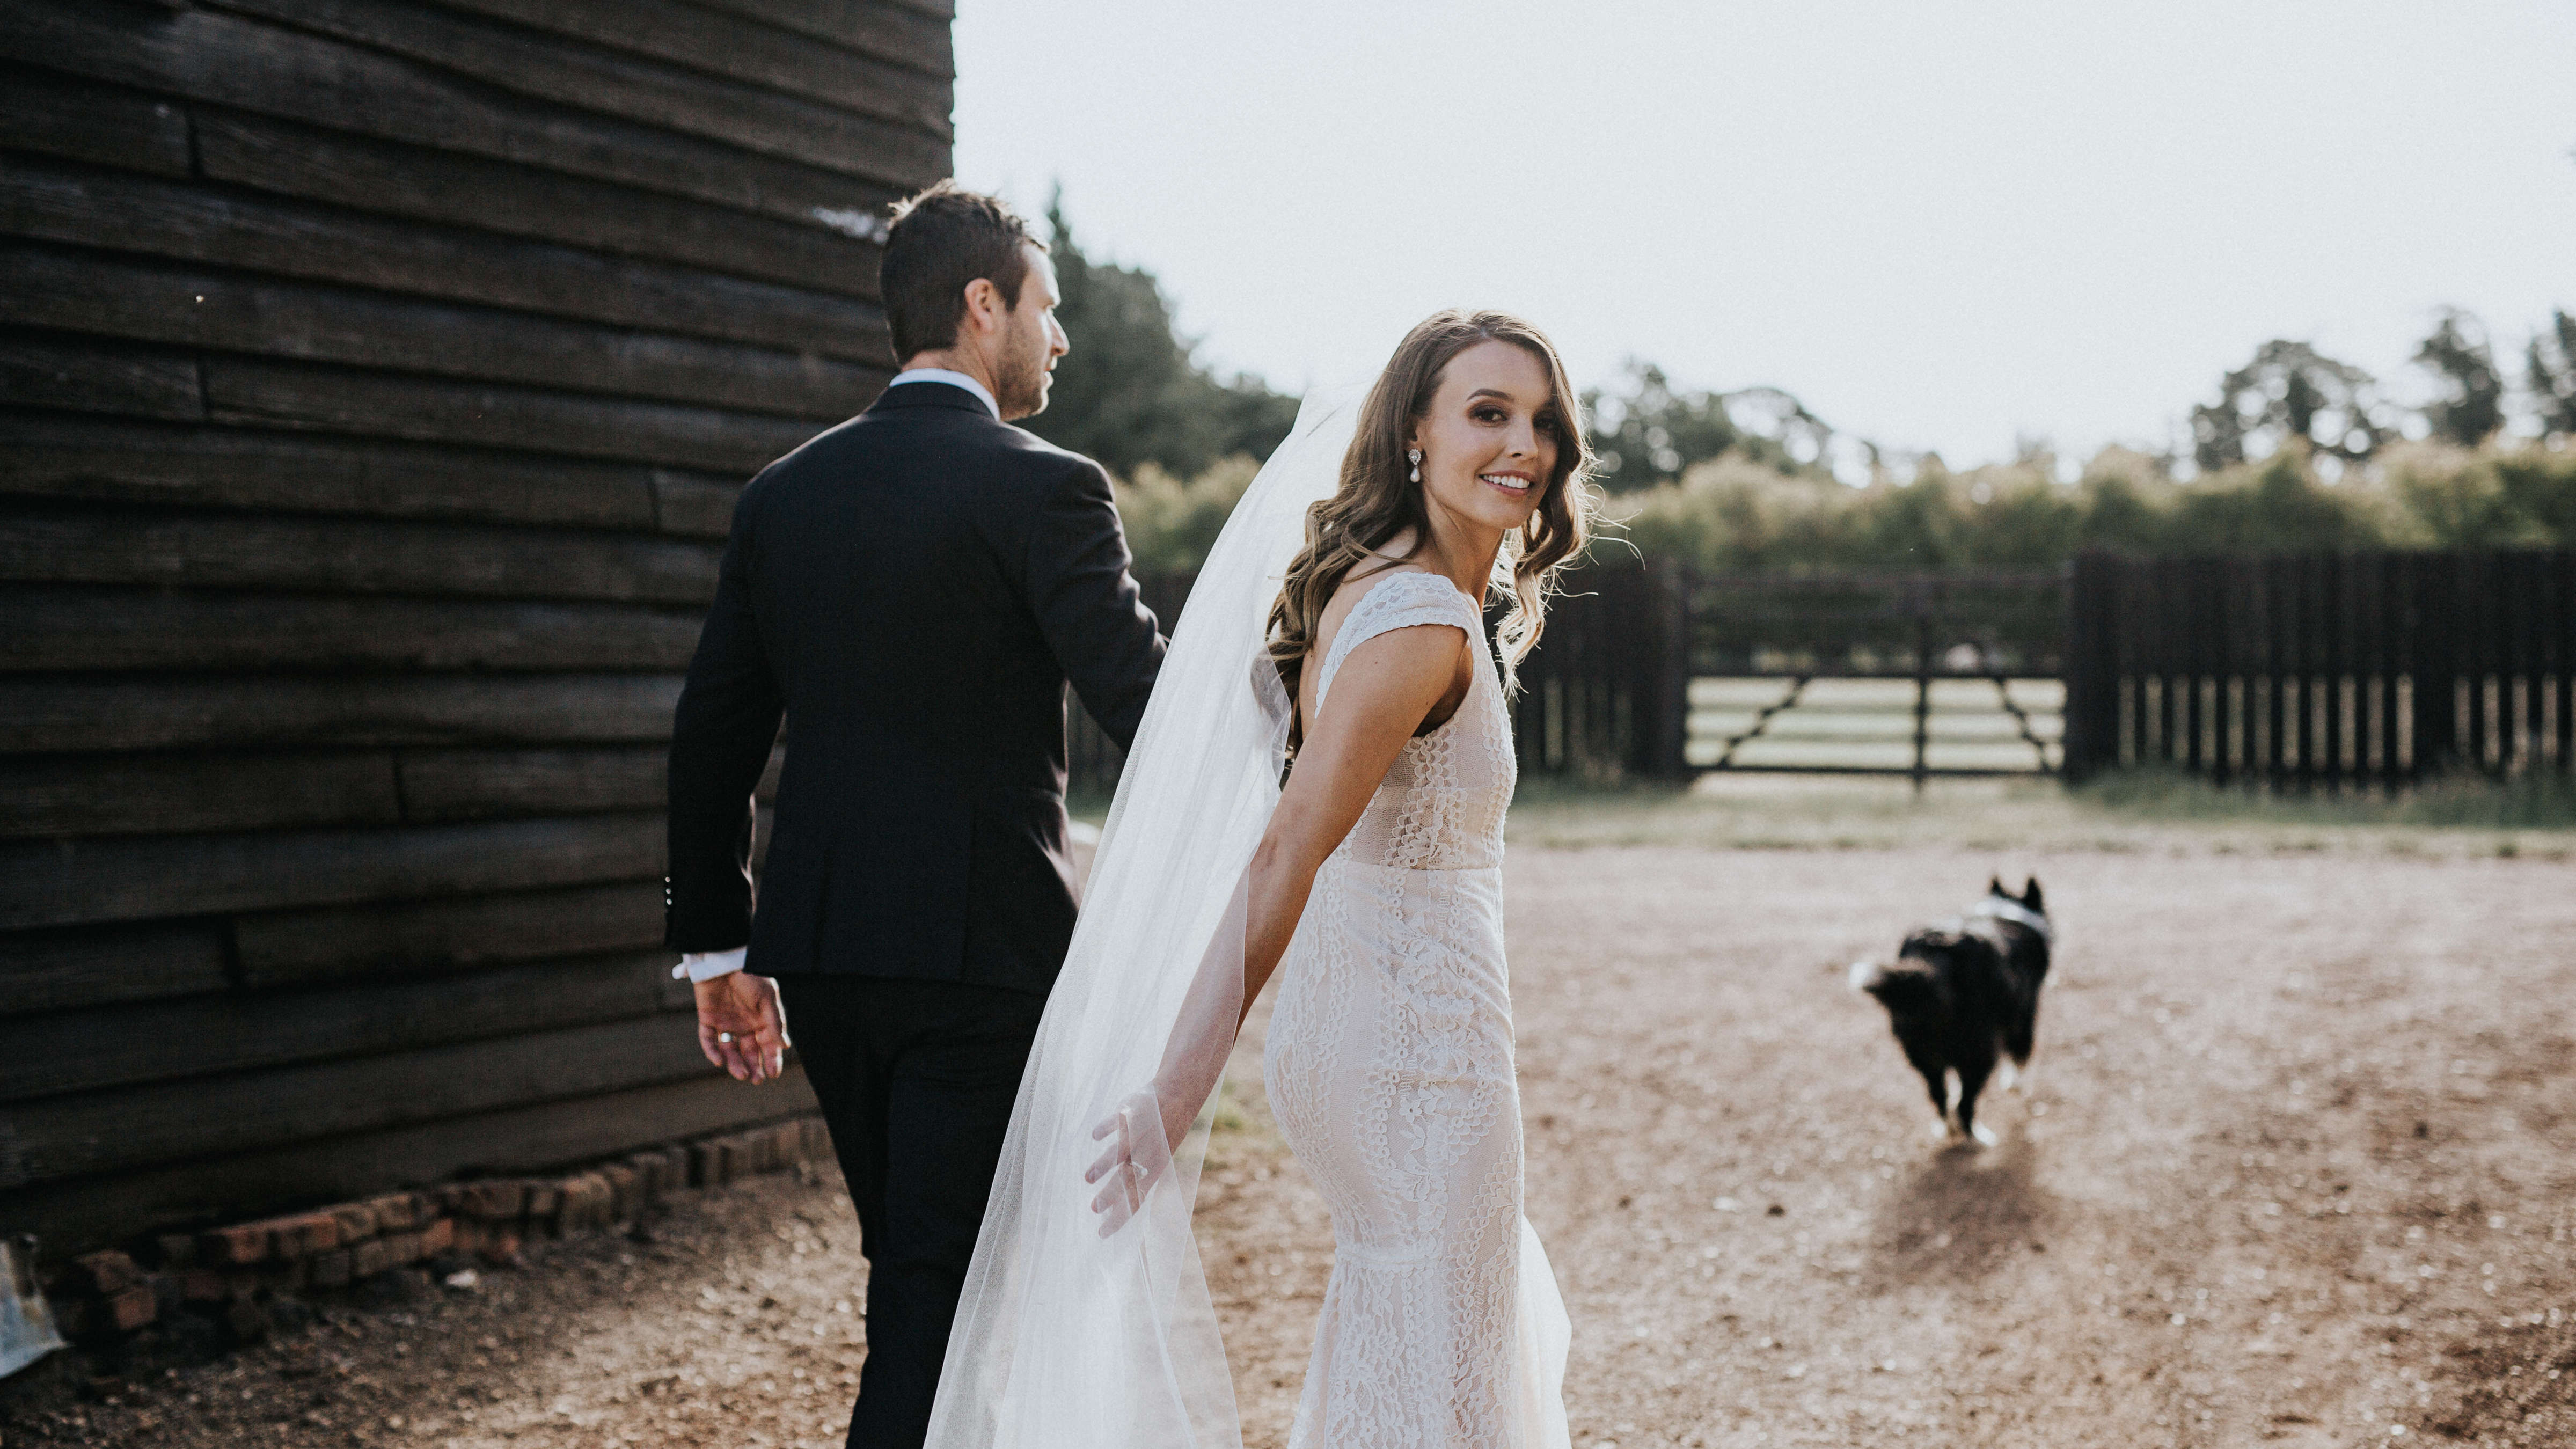 A bride turns to look at the camera while holding hands with her husband. Their border collie dog runs ahead of them towards a tall timber fence. Photo: Cassie Sullivan.